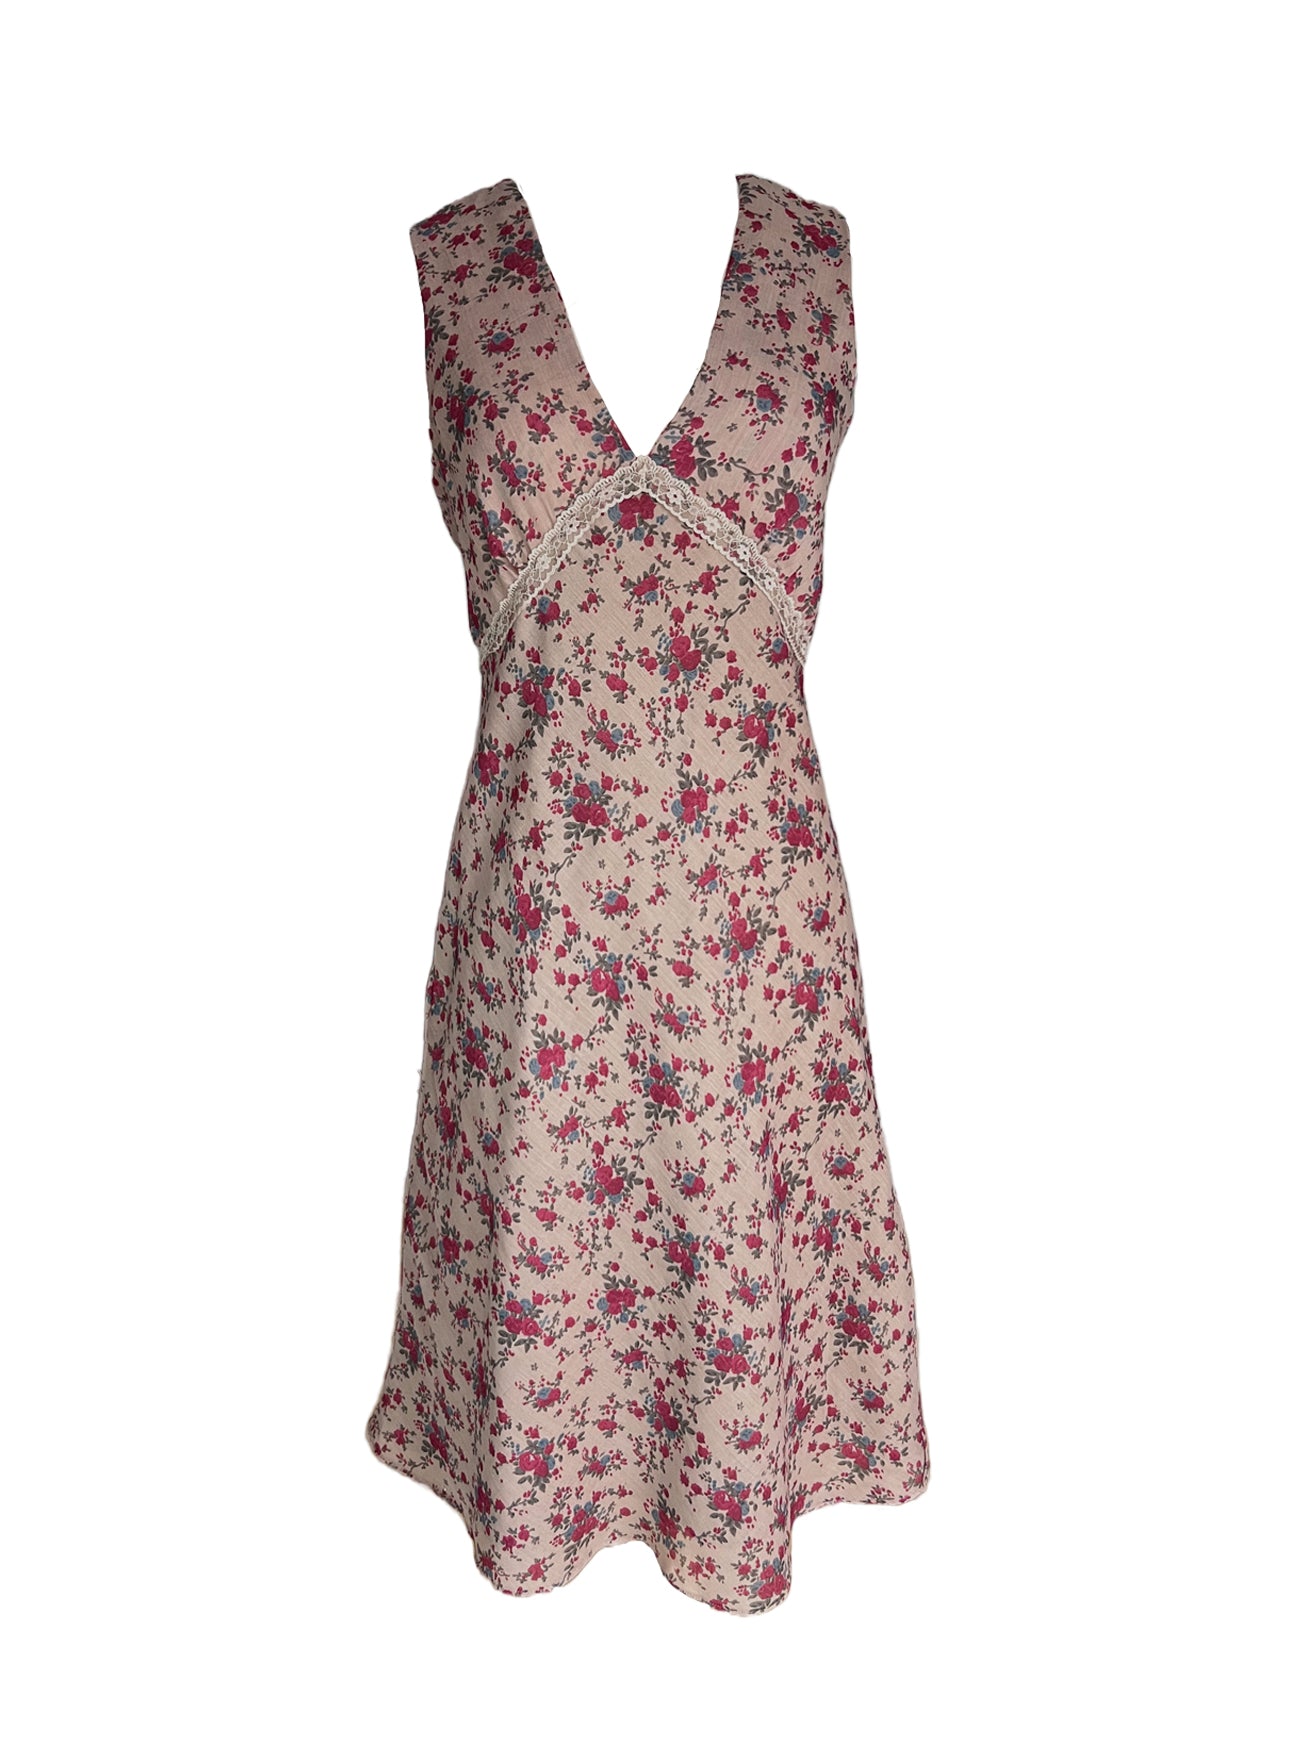 riley rose print voile dress front view